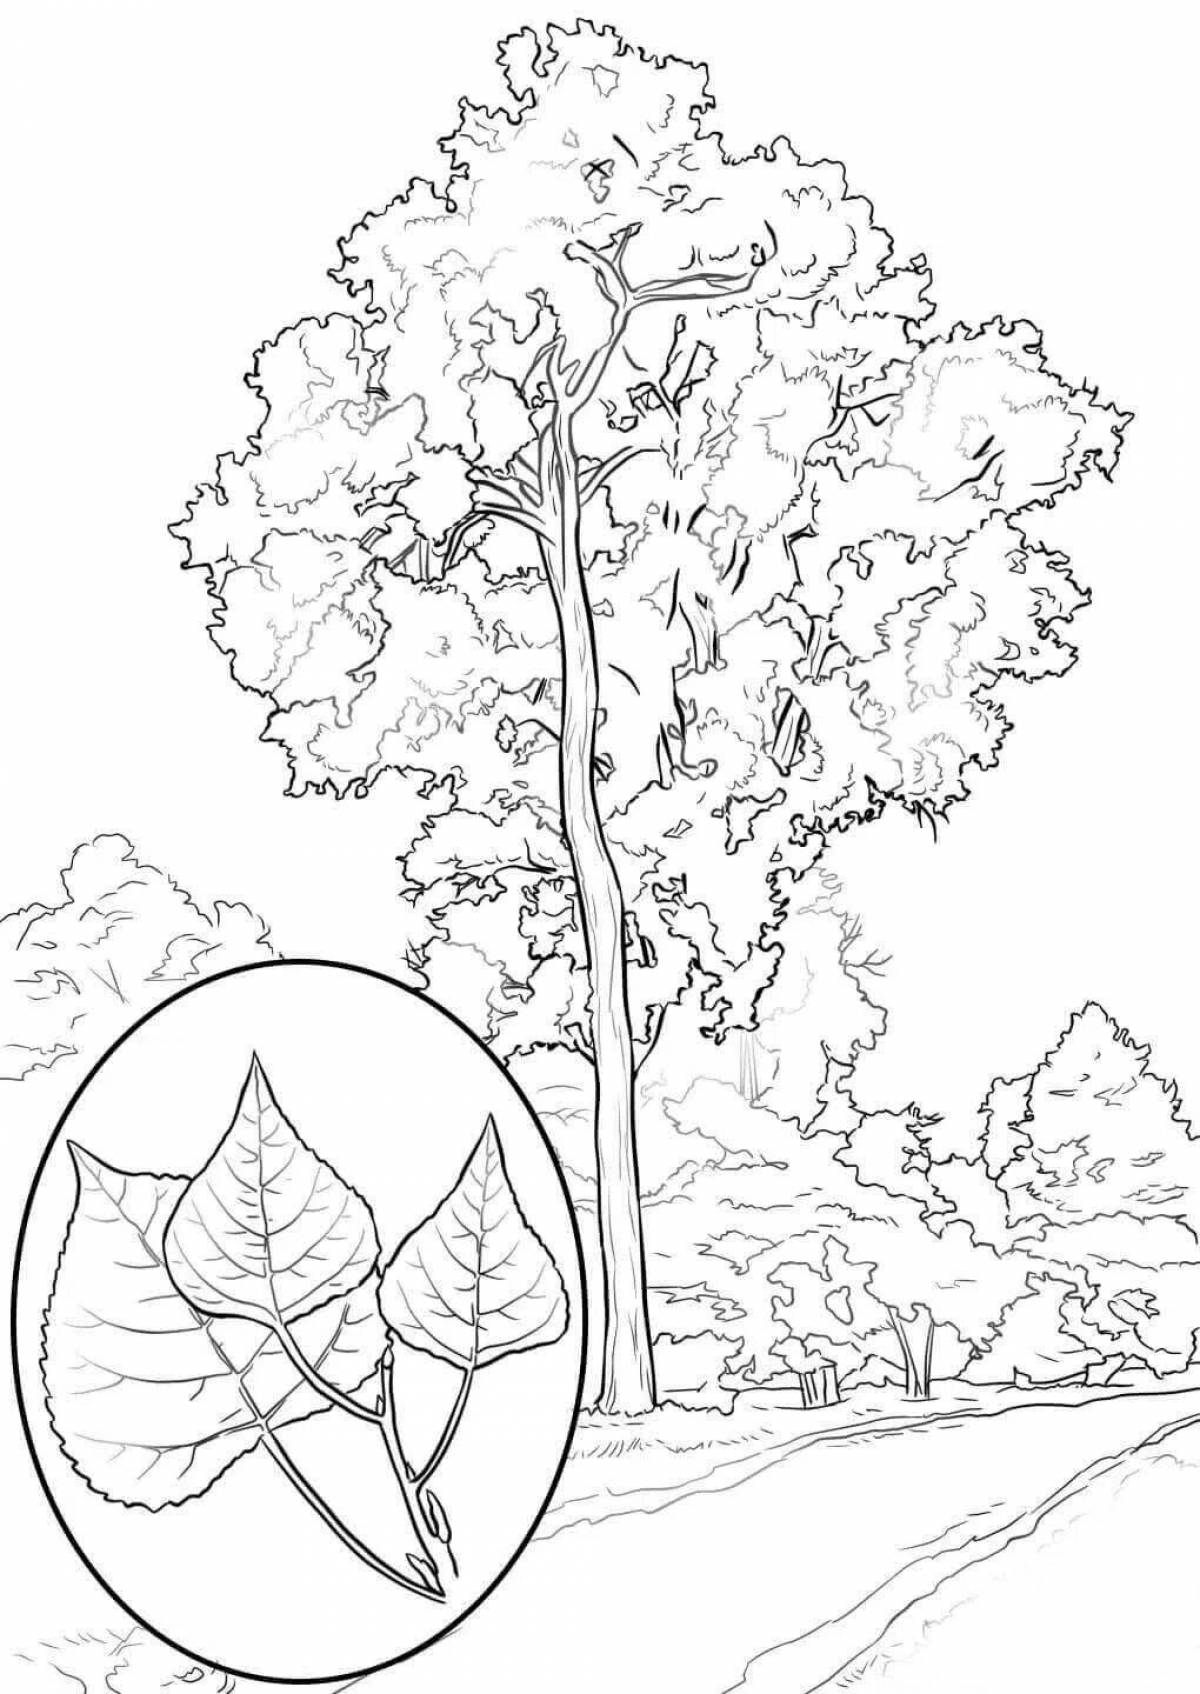 Glowing aspen coloring page